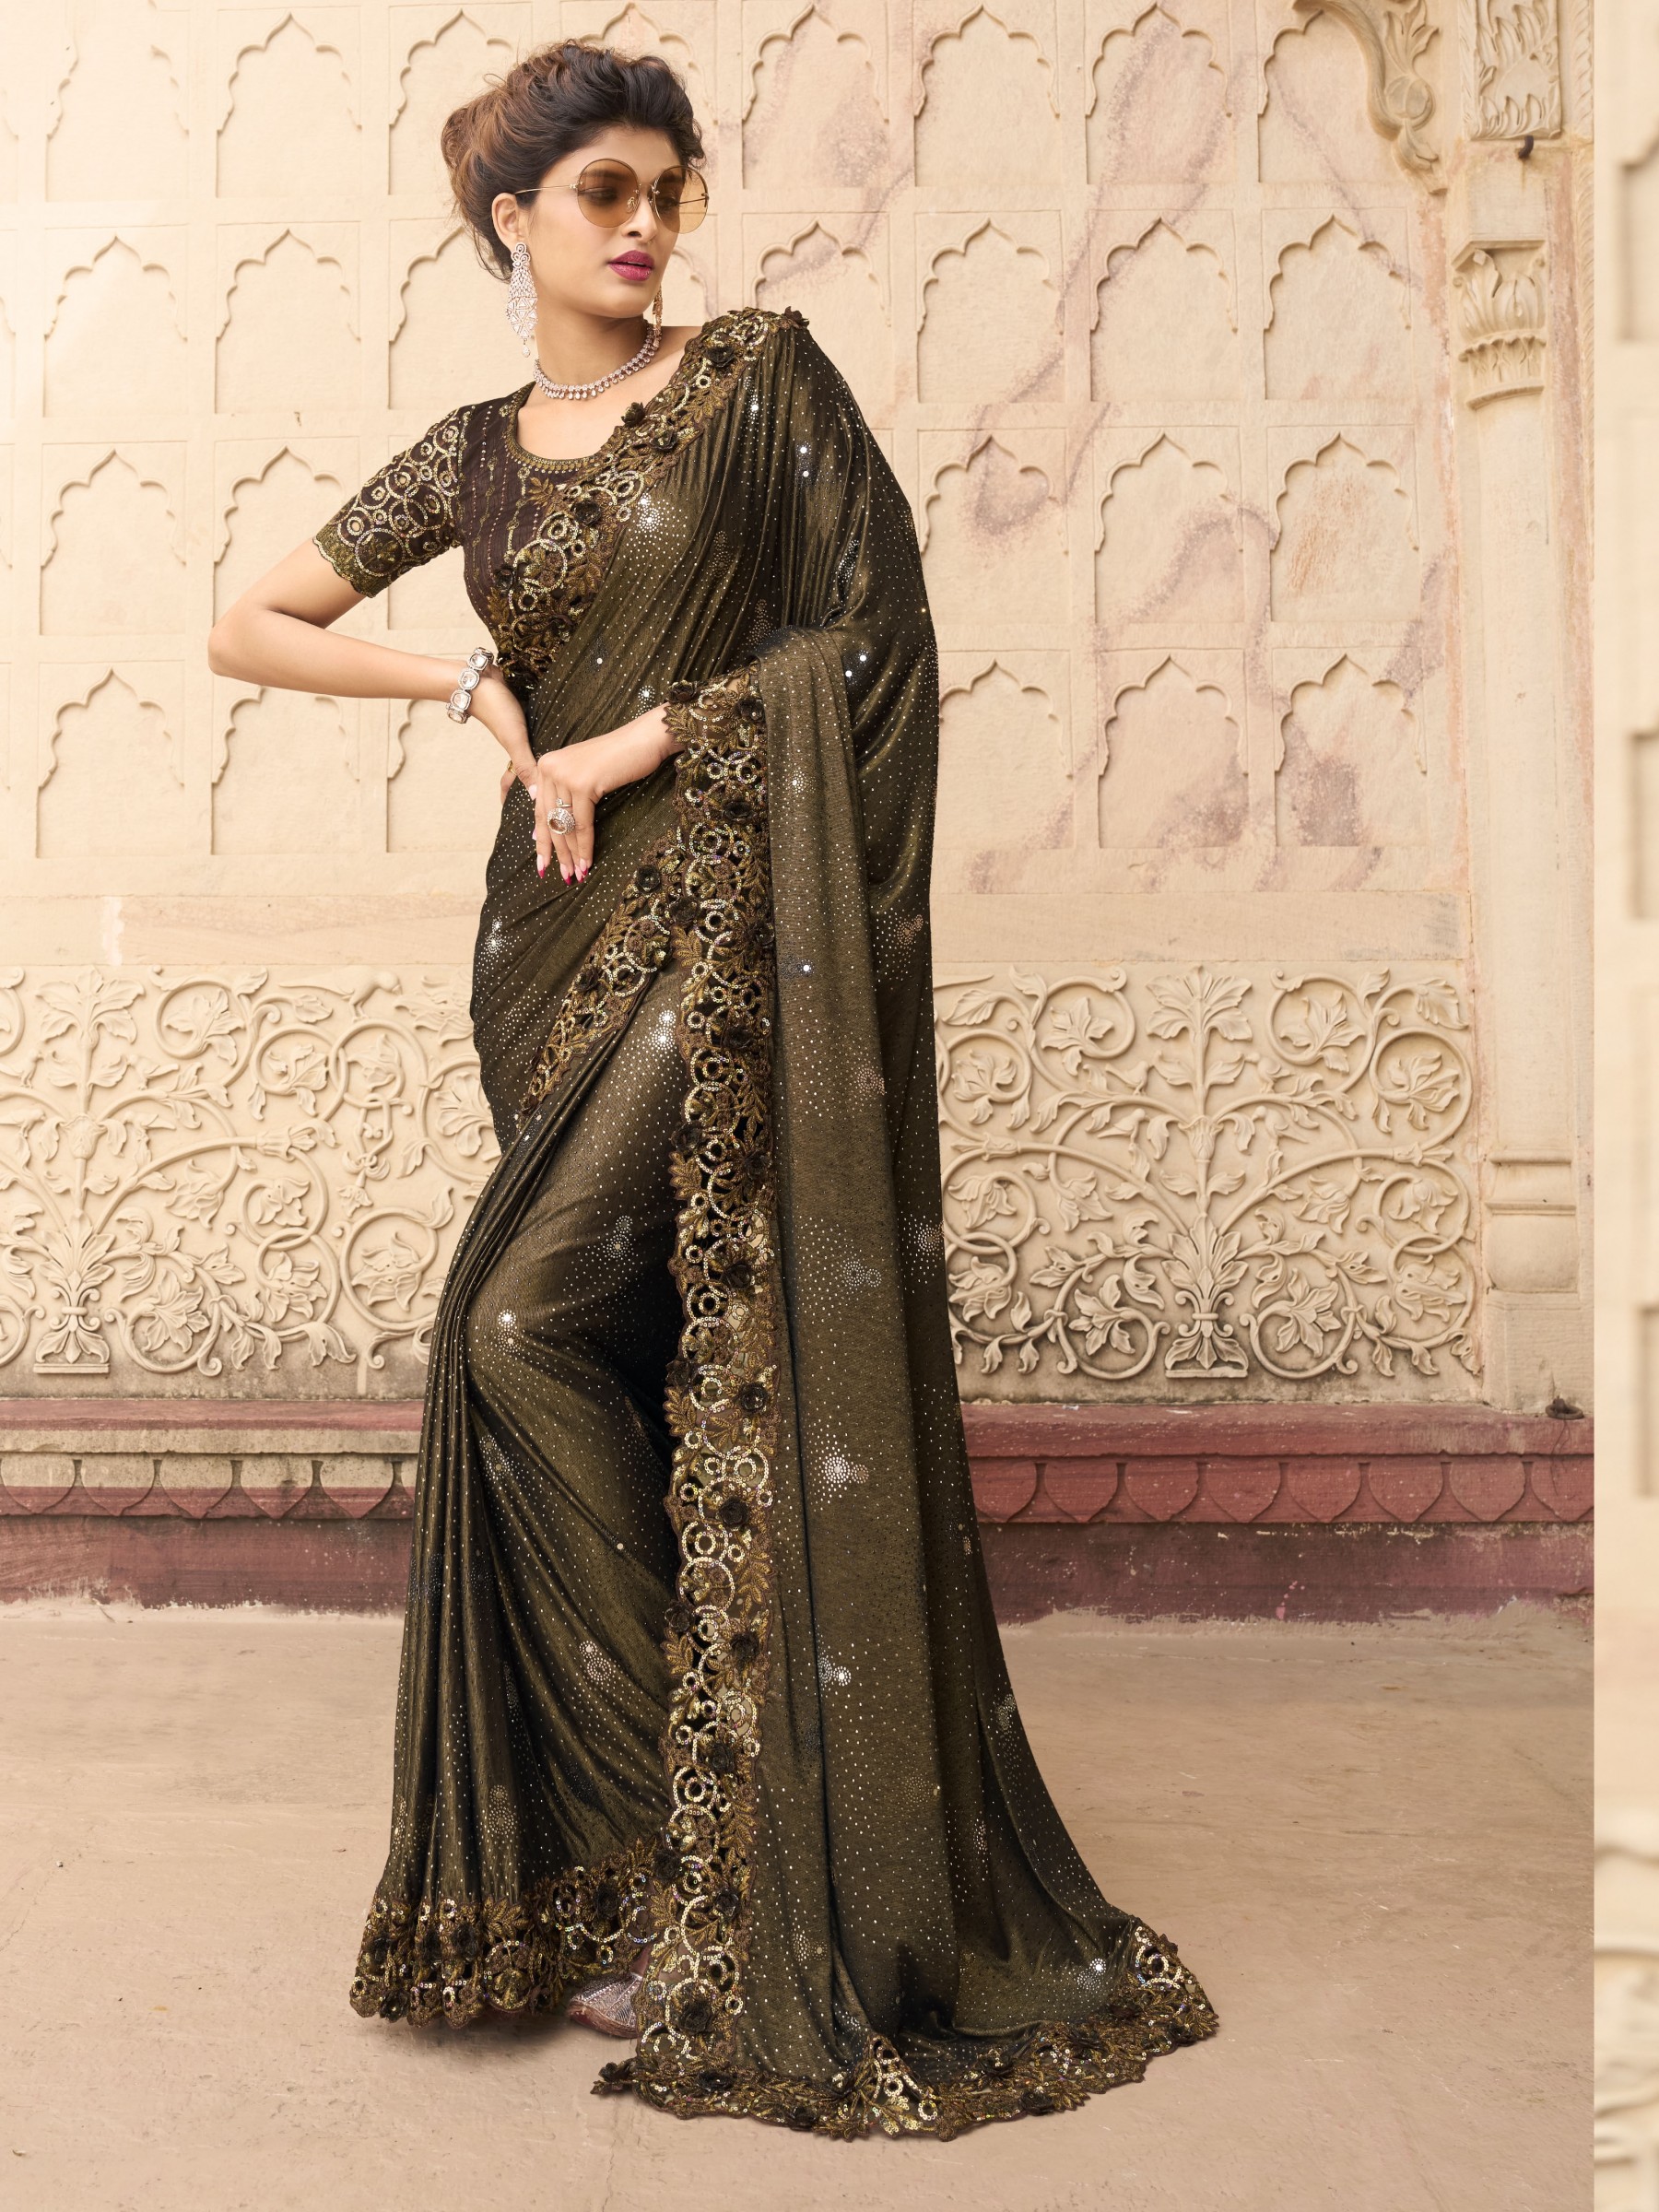 Fancy Laycra Wedding Wear Saree In Brown Color With Embroidery Work 